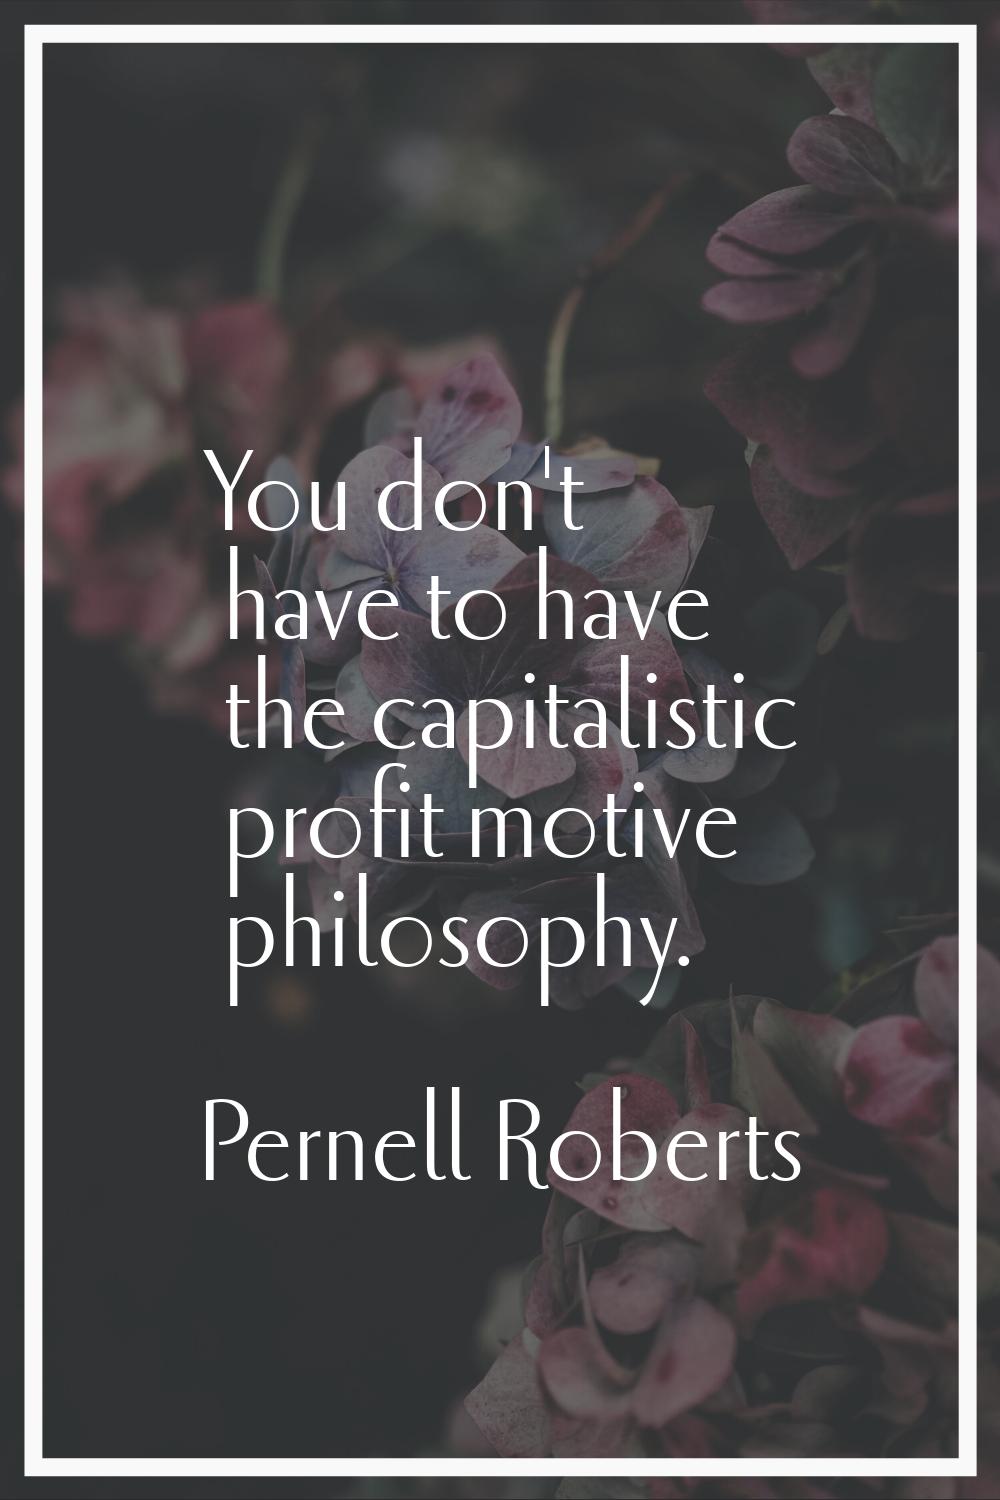 You don't have to have the capitalistic profit motive philosophy.